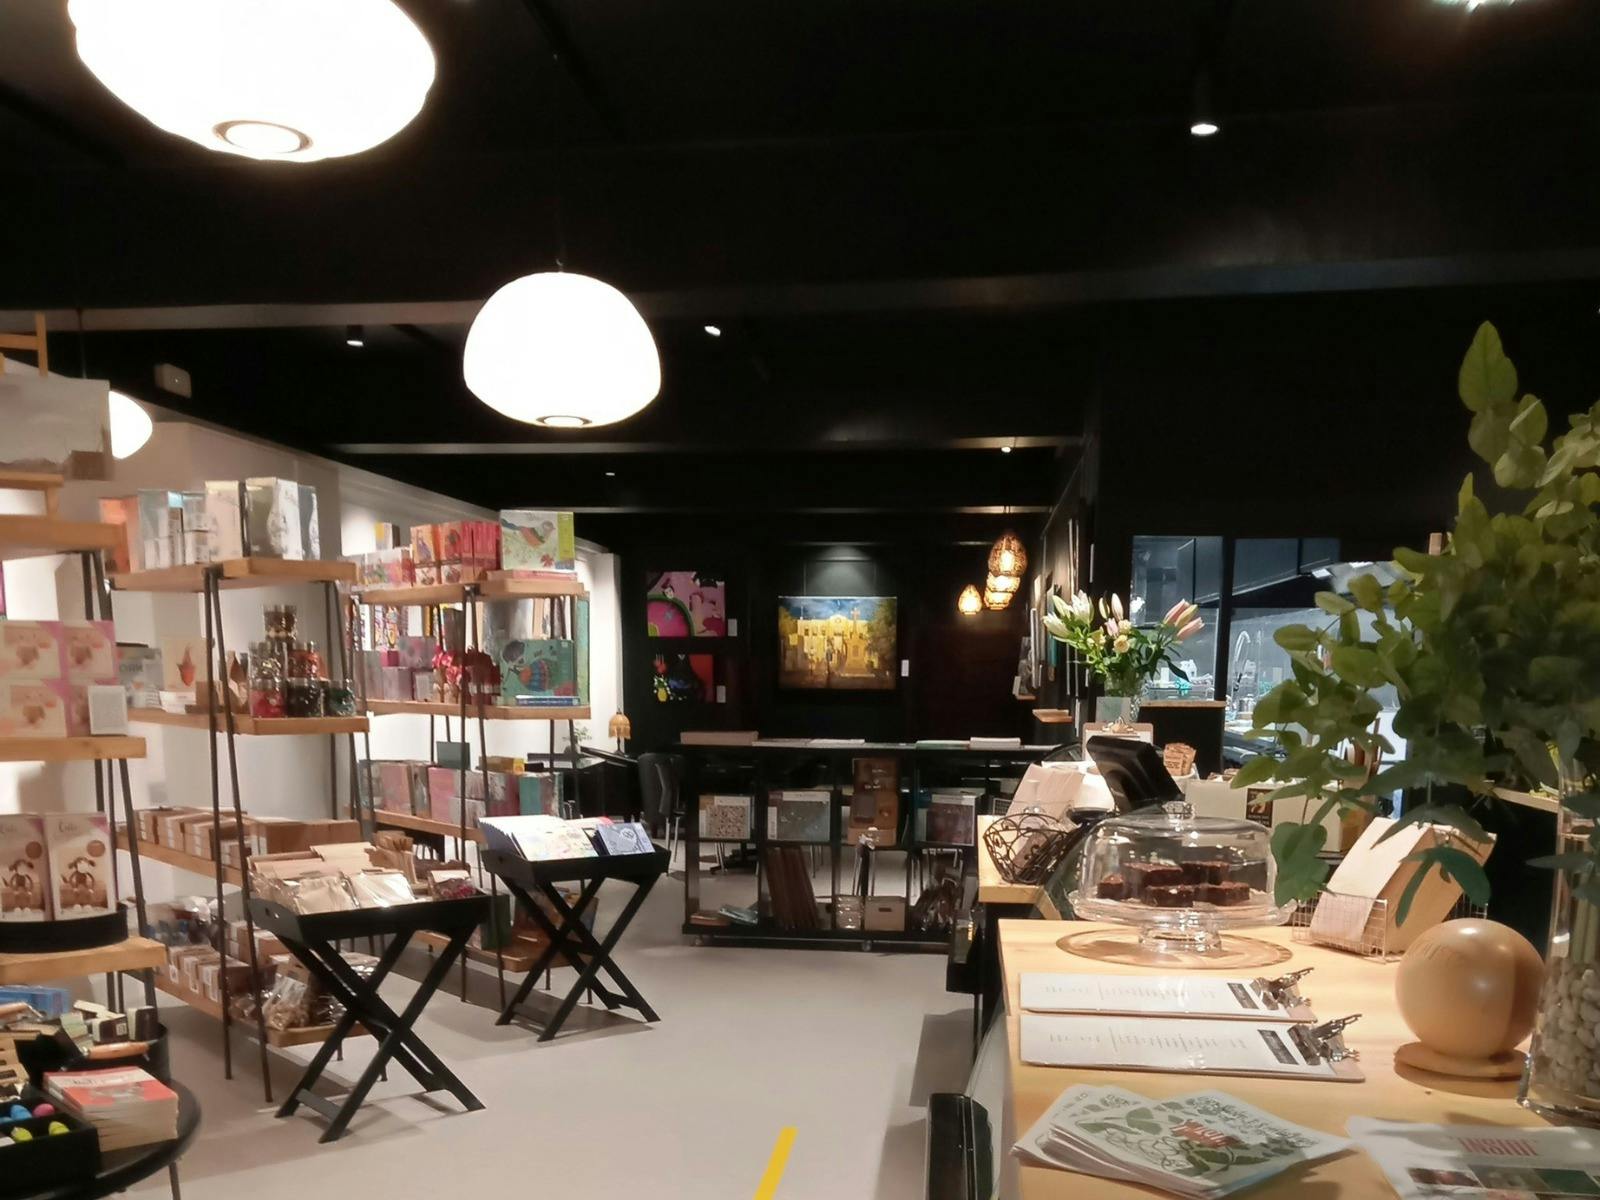 inside the artHouse you will find on the left shelves of creative products of many colours.